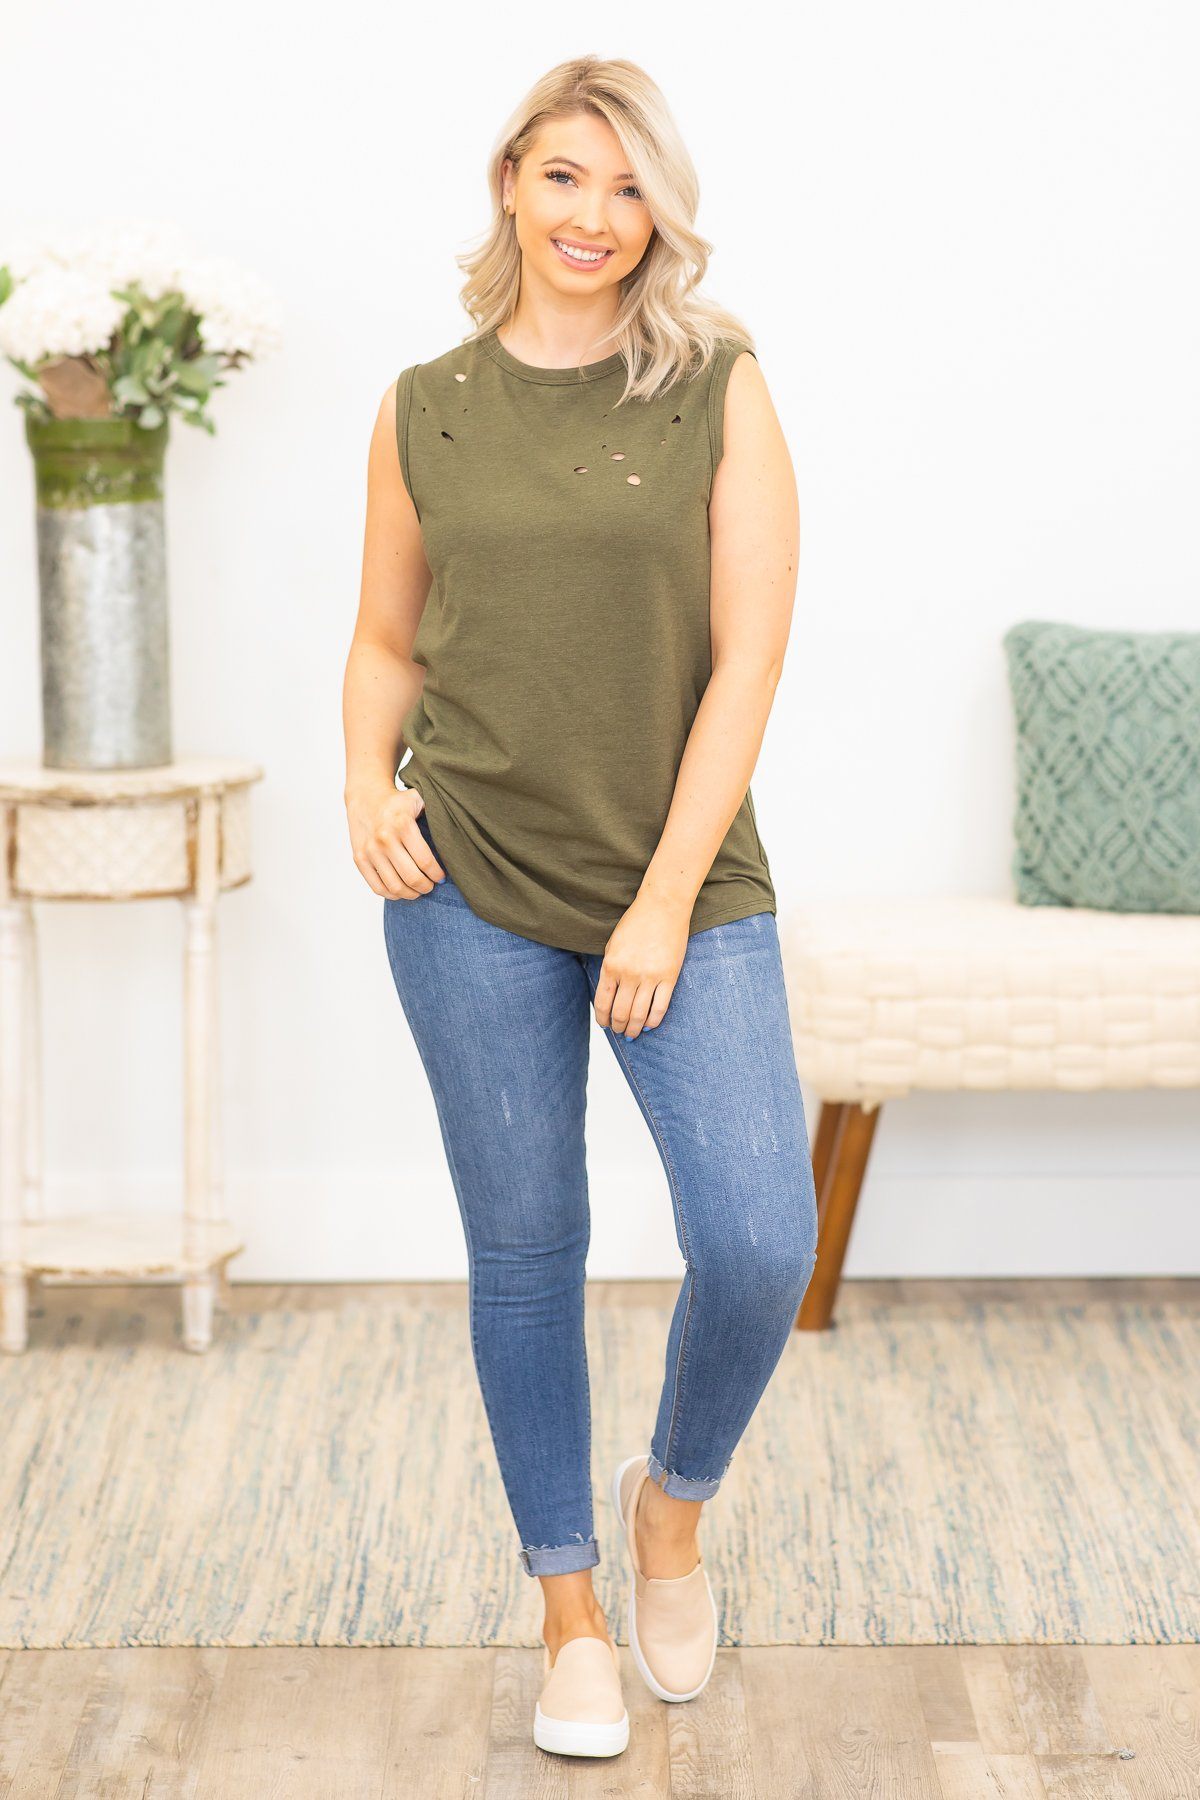 Nothing To Lose Tank Top in Olive - Filly Flair